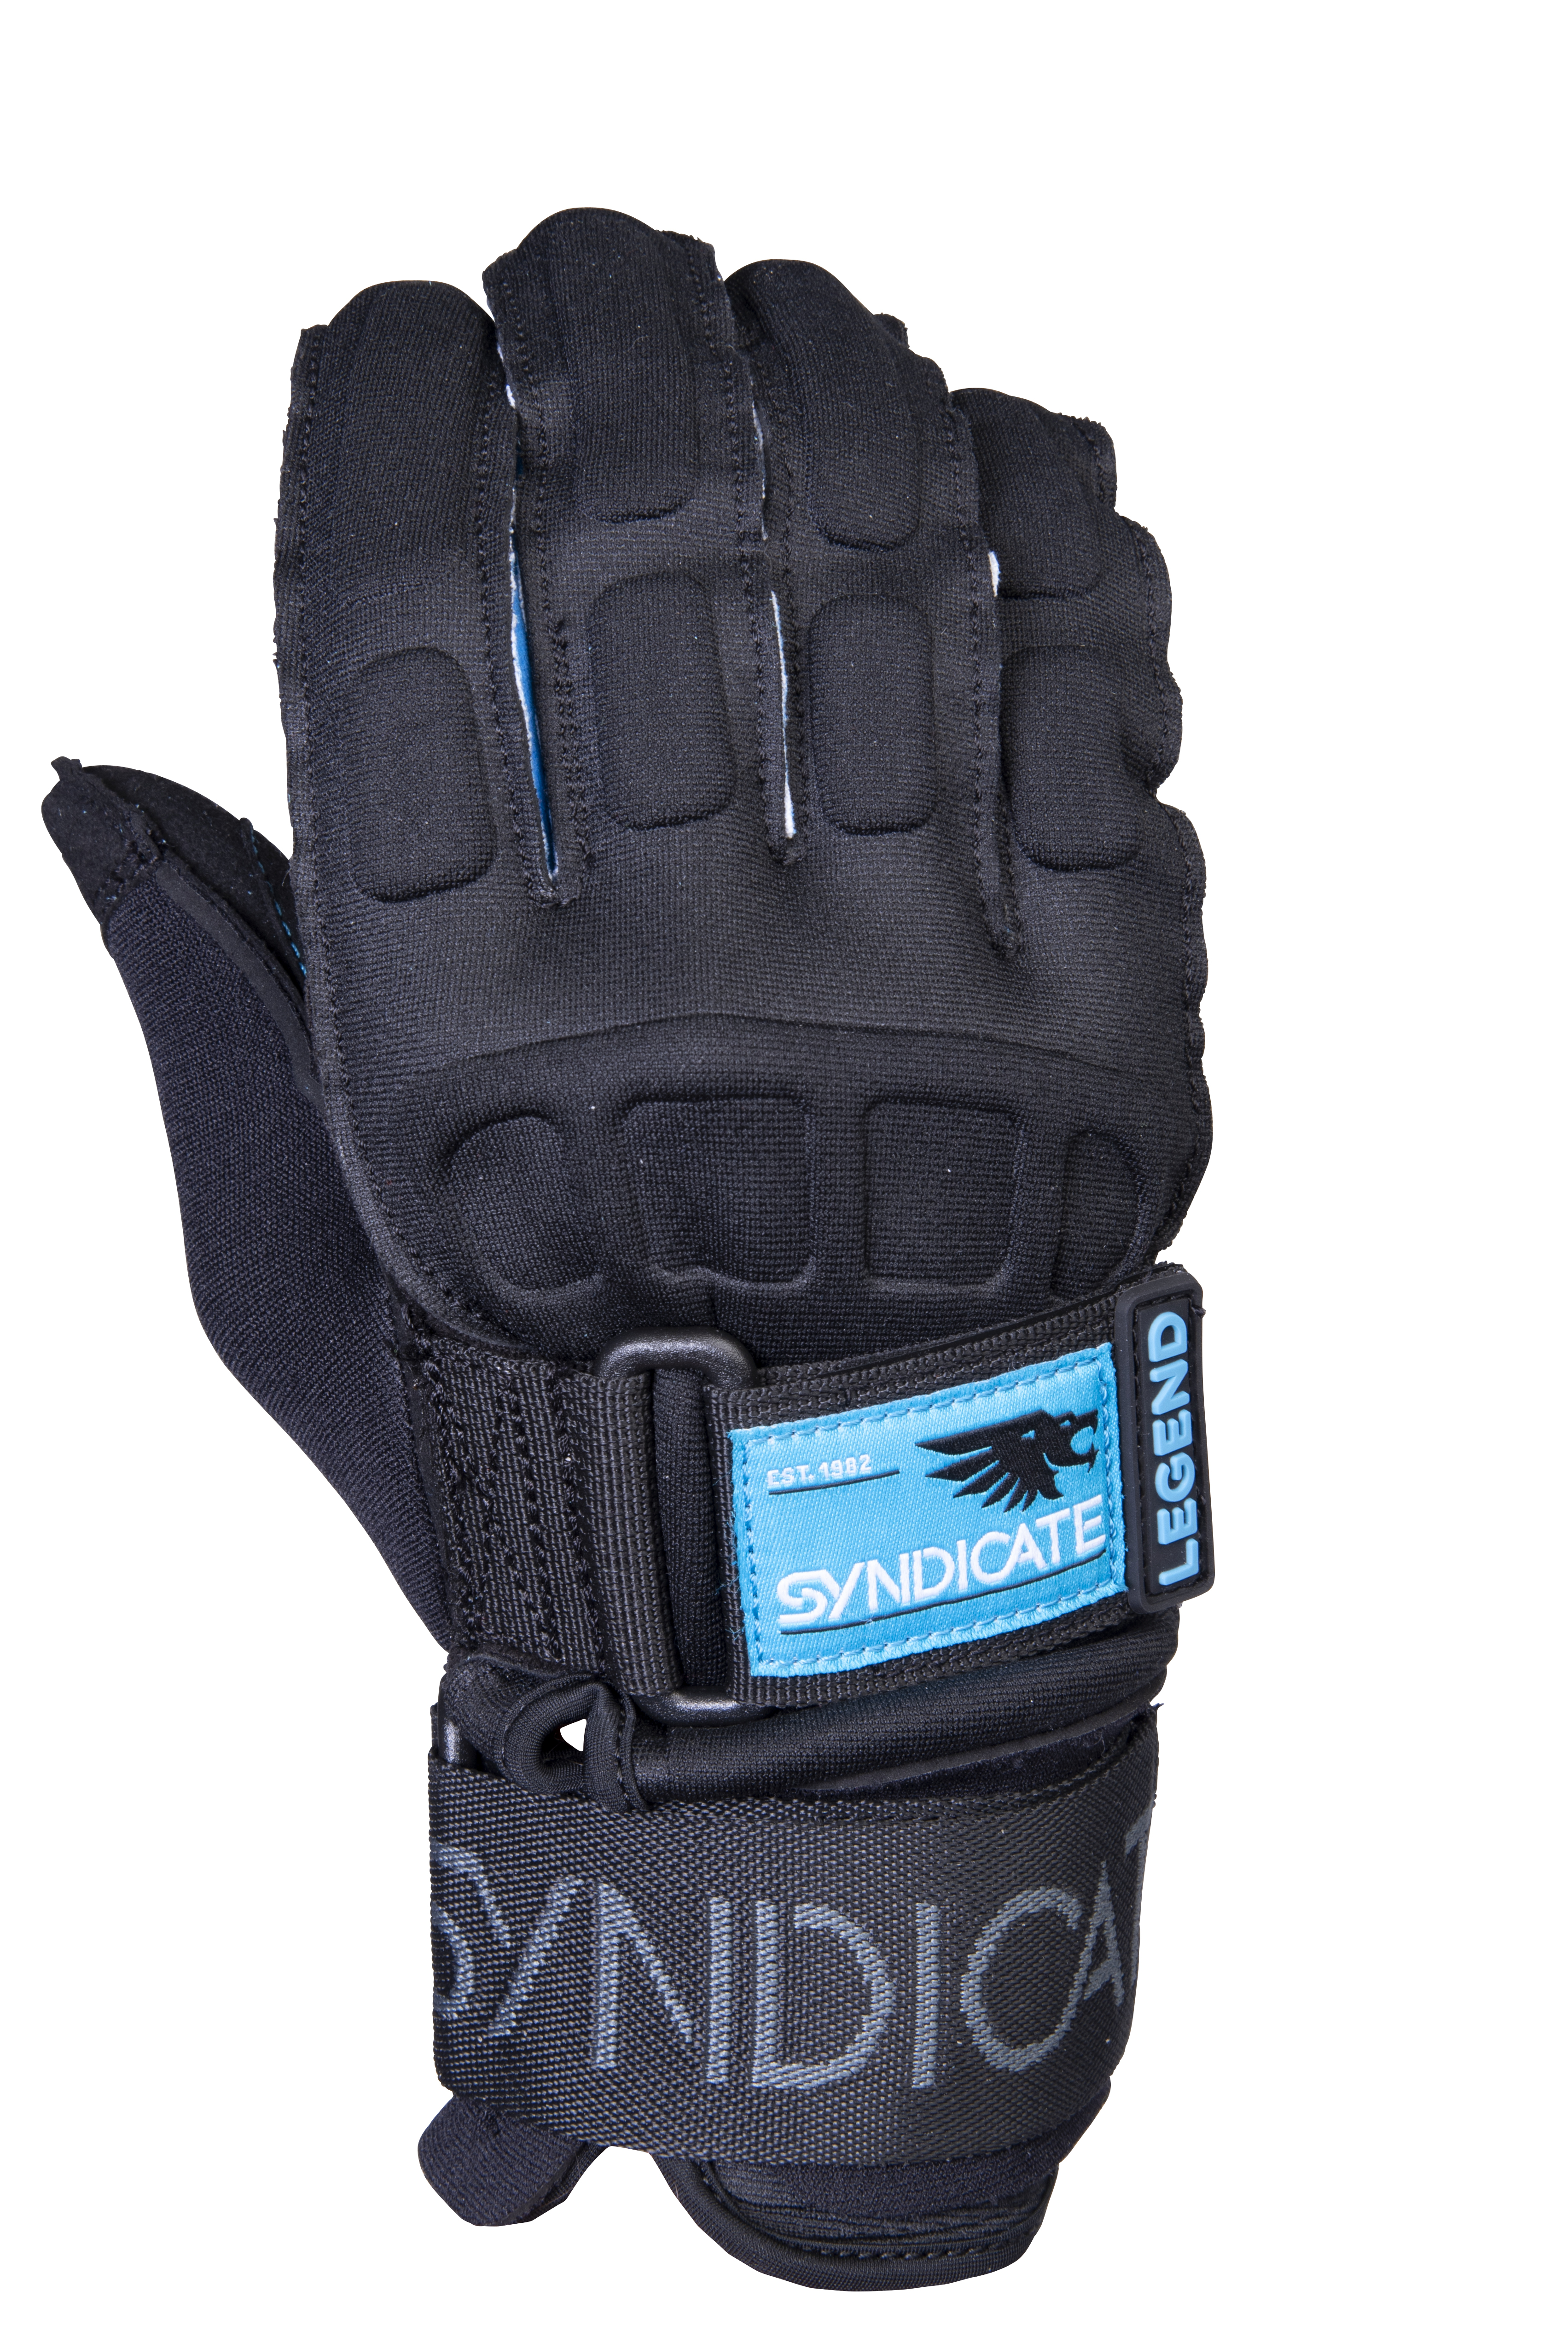   SYNDICATE LEGEND INSIDE-OUT GLOVE HO SPORTS 2019